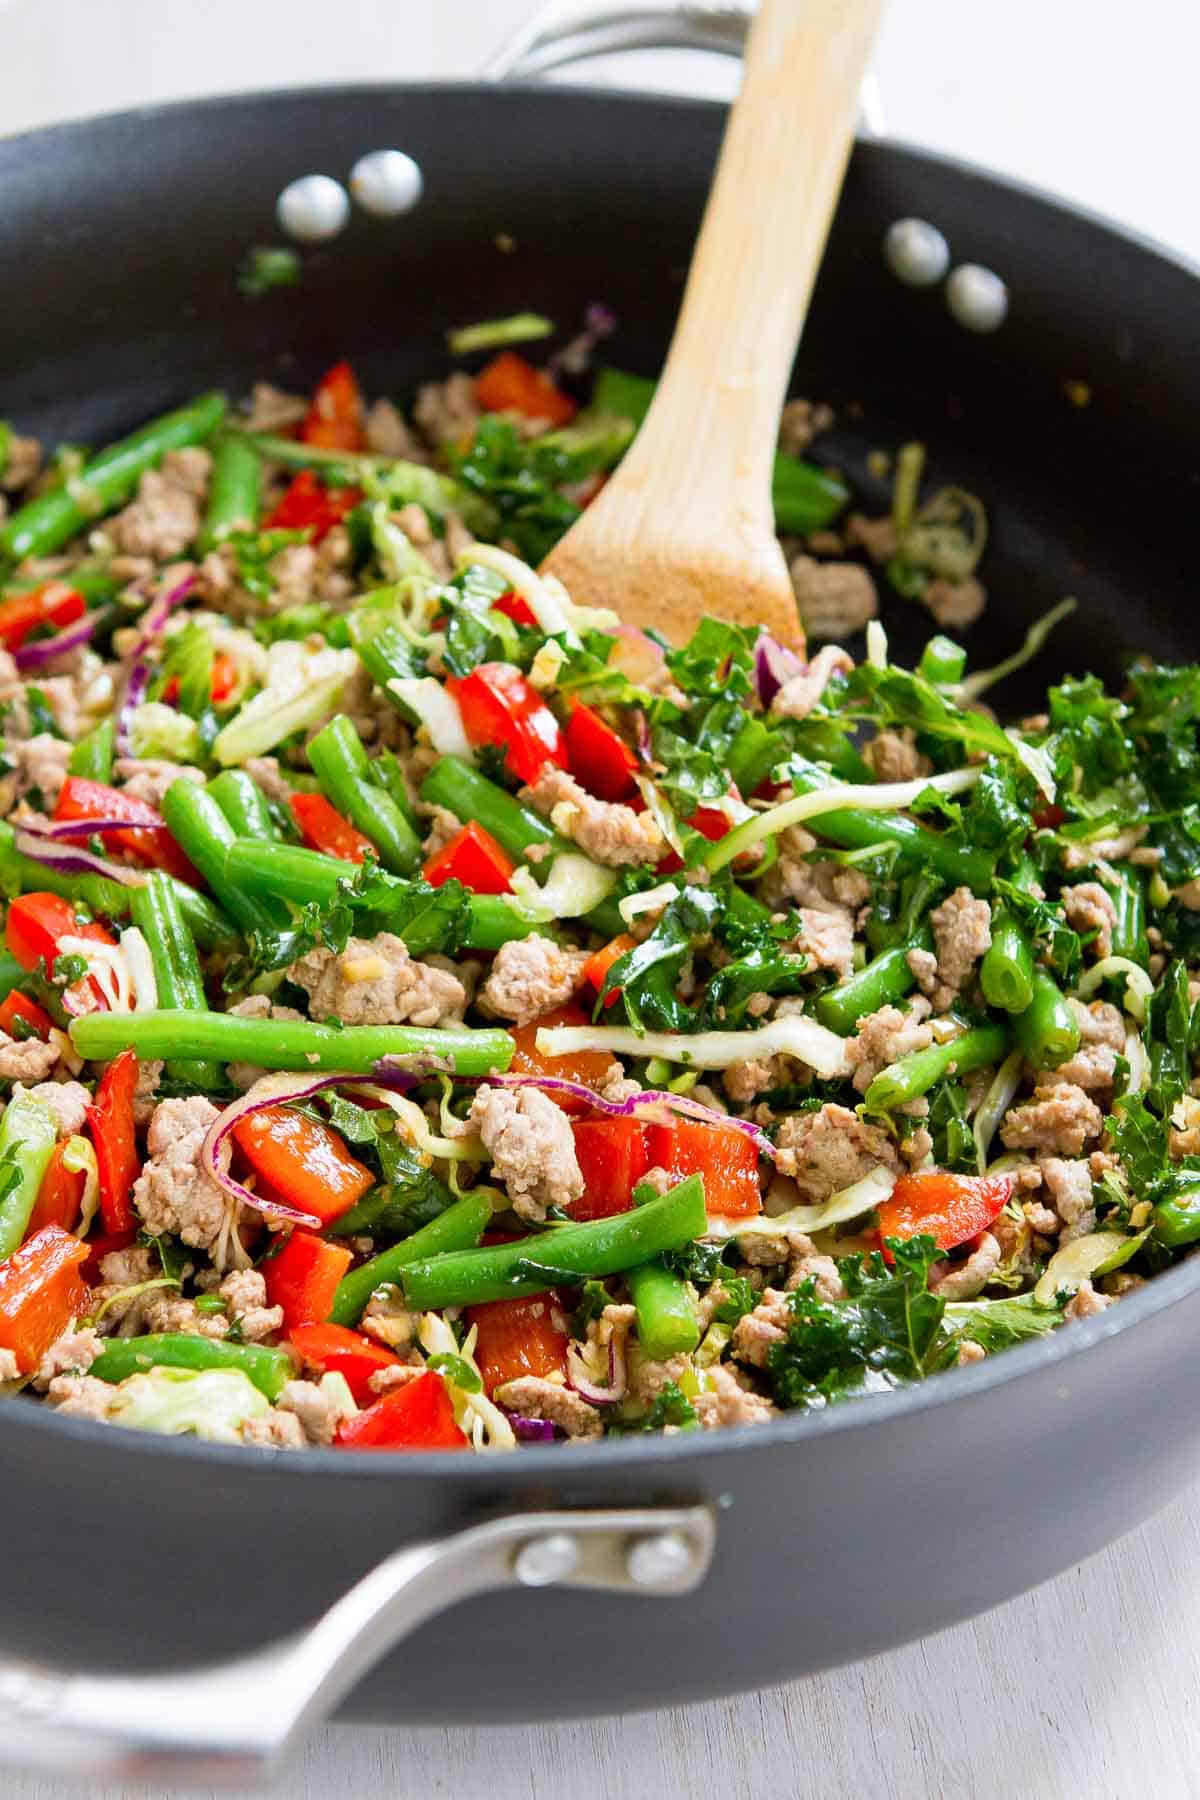 Need a healthy 20-minute meal tonight? This Ground Turkey Stir-Fry with Green Beans and Kale is packed with vegetables and nutrients. 